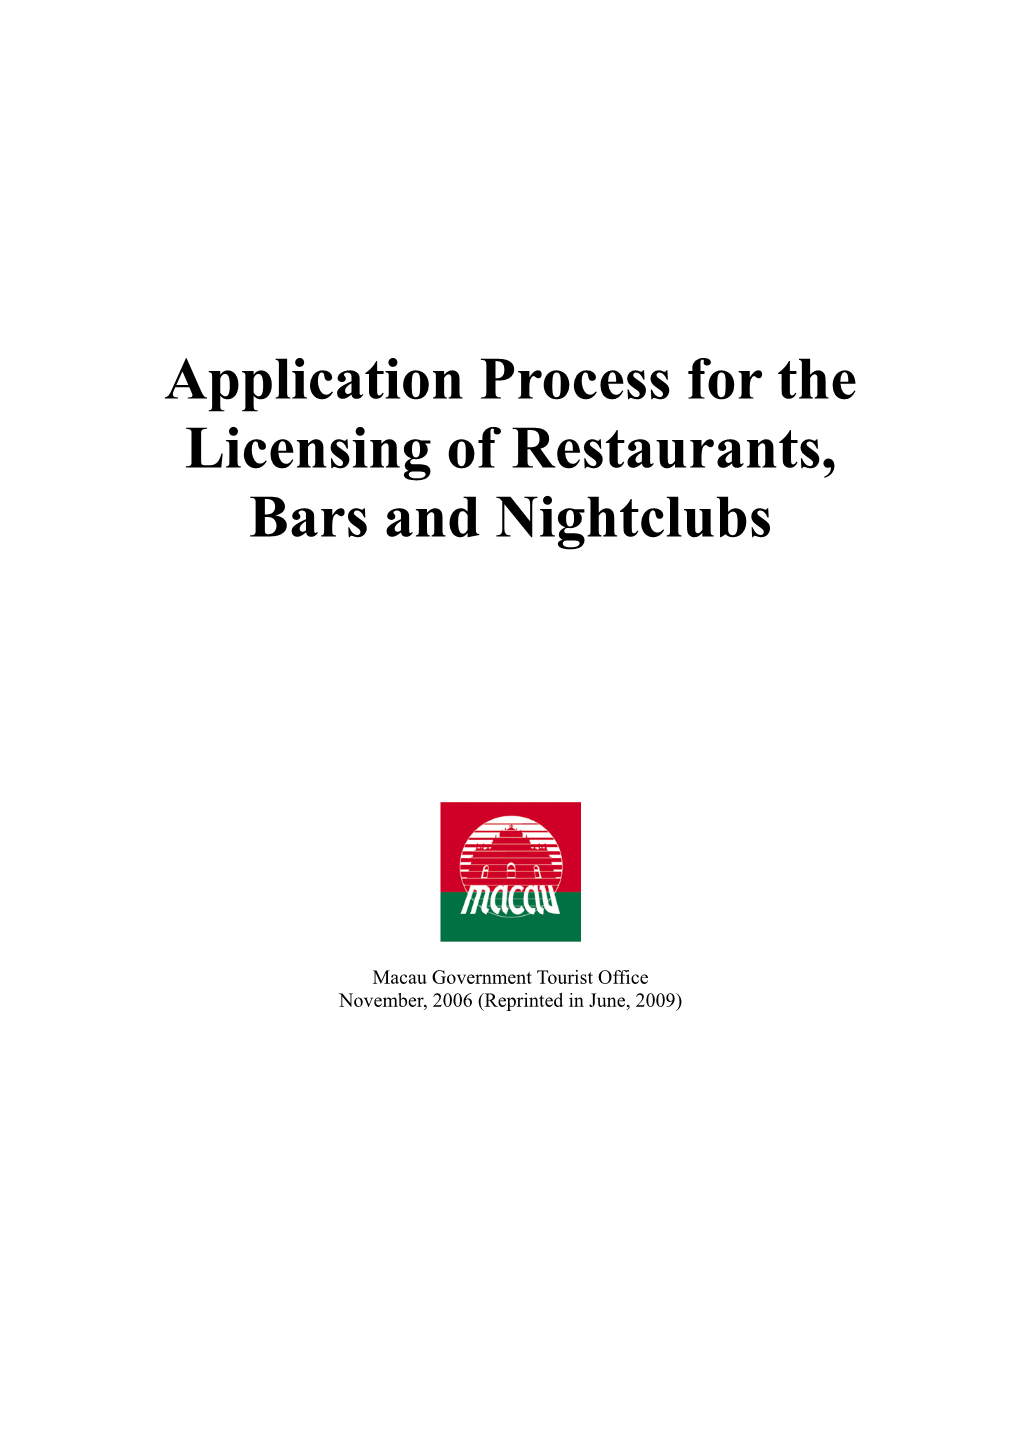 Application Process for the Licensing of Restaurants, Bars and Nightclubs